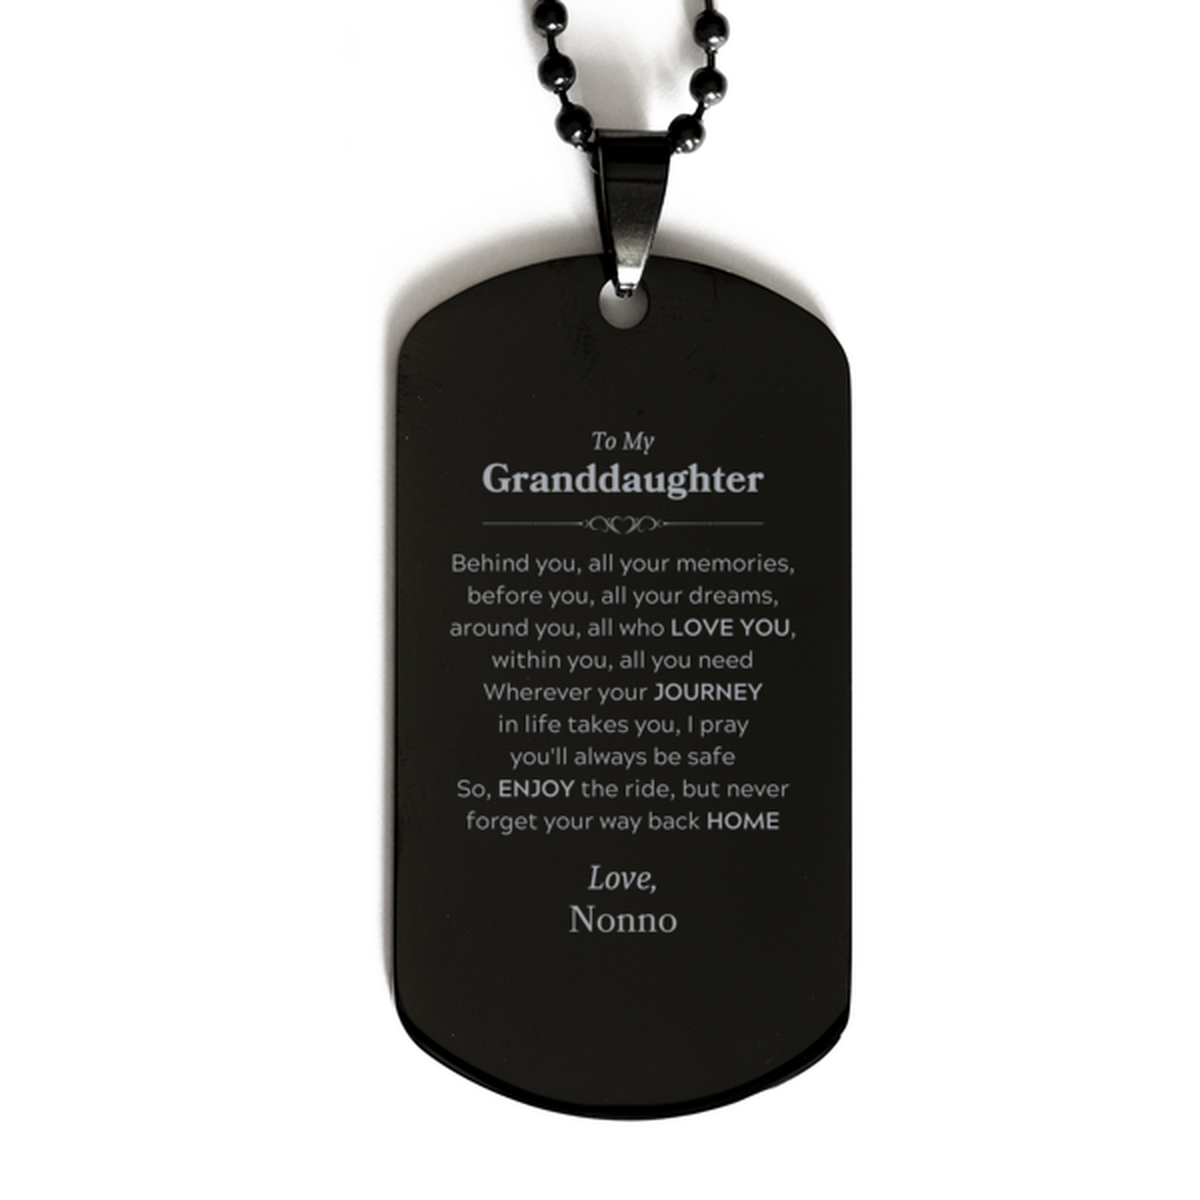 To My Granddaughter Graduation Gifts from Nonno, Granddaughter Black Dog Tag Christmas Birthday Gifts for Granddaughter Behind you, all your memories, before you, all your dreams. Love, Nonno